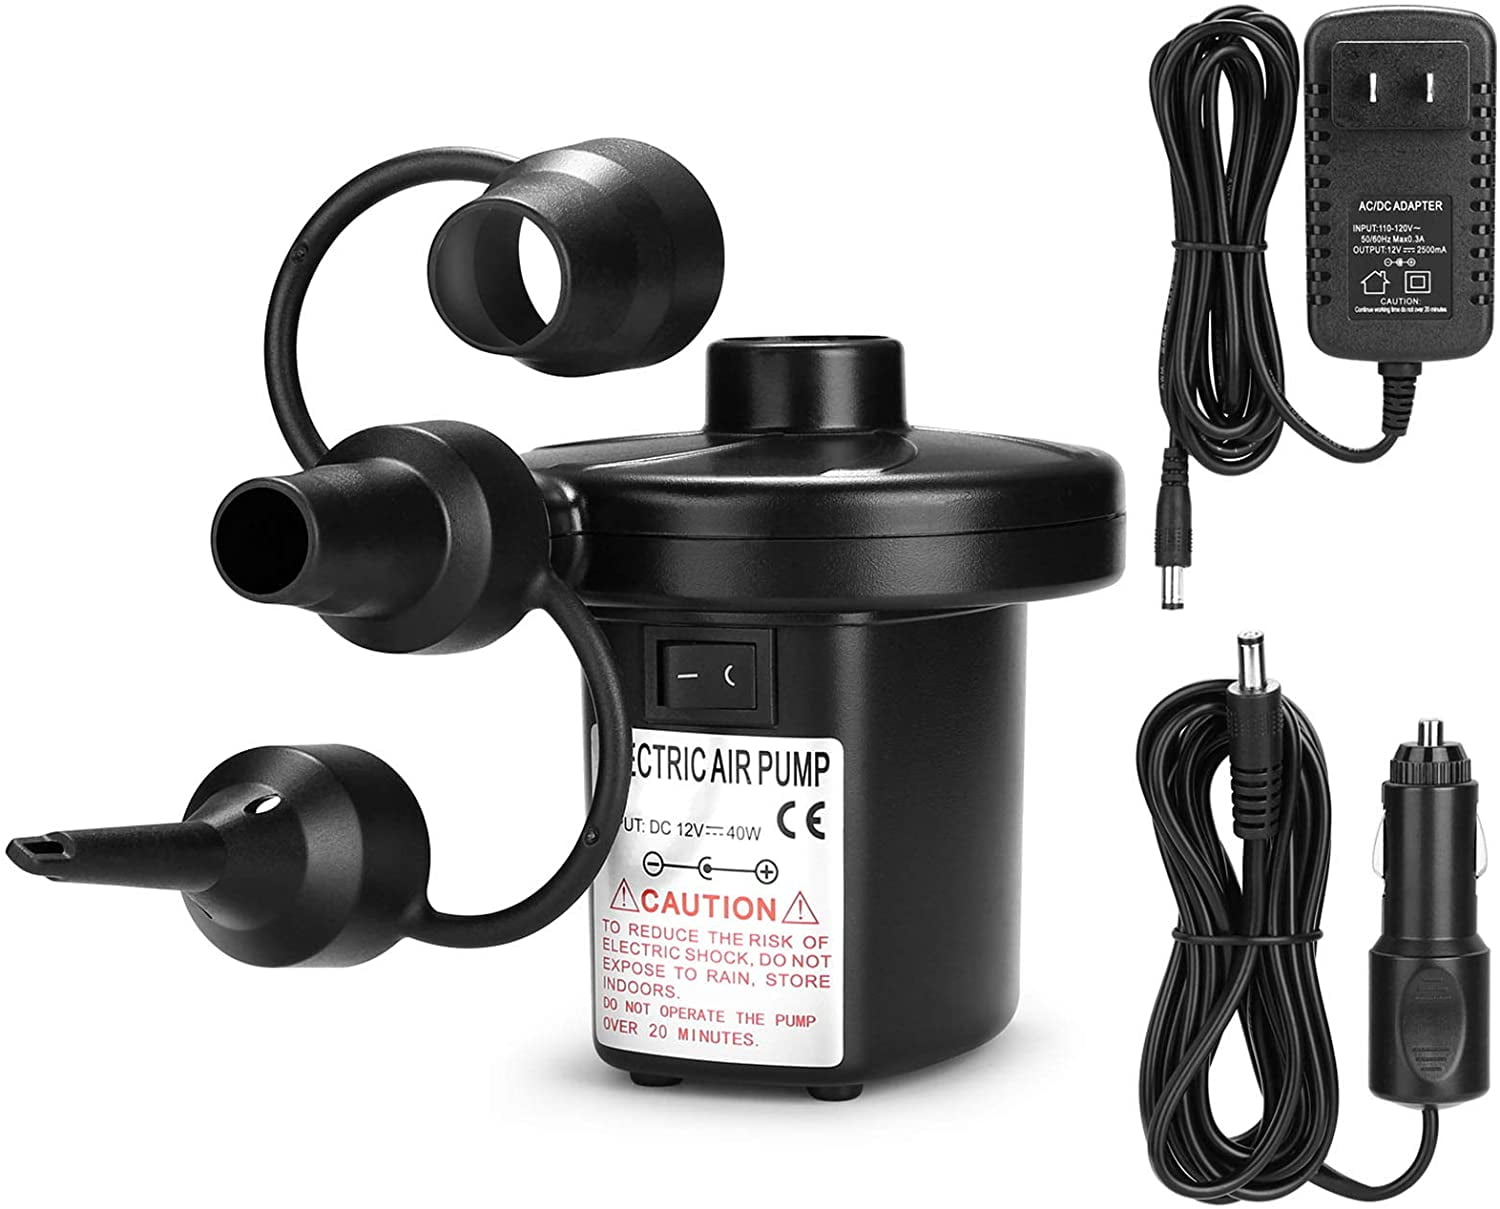 Intex Electric Pump Quick-fill 12v Ac/dc Inflation Travel for Boat Mattress for sale online 